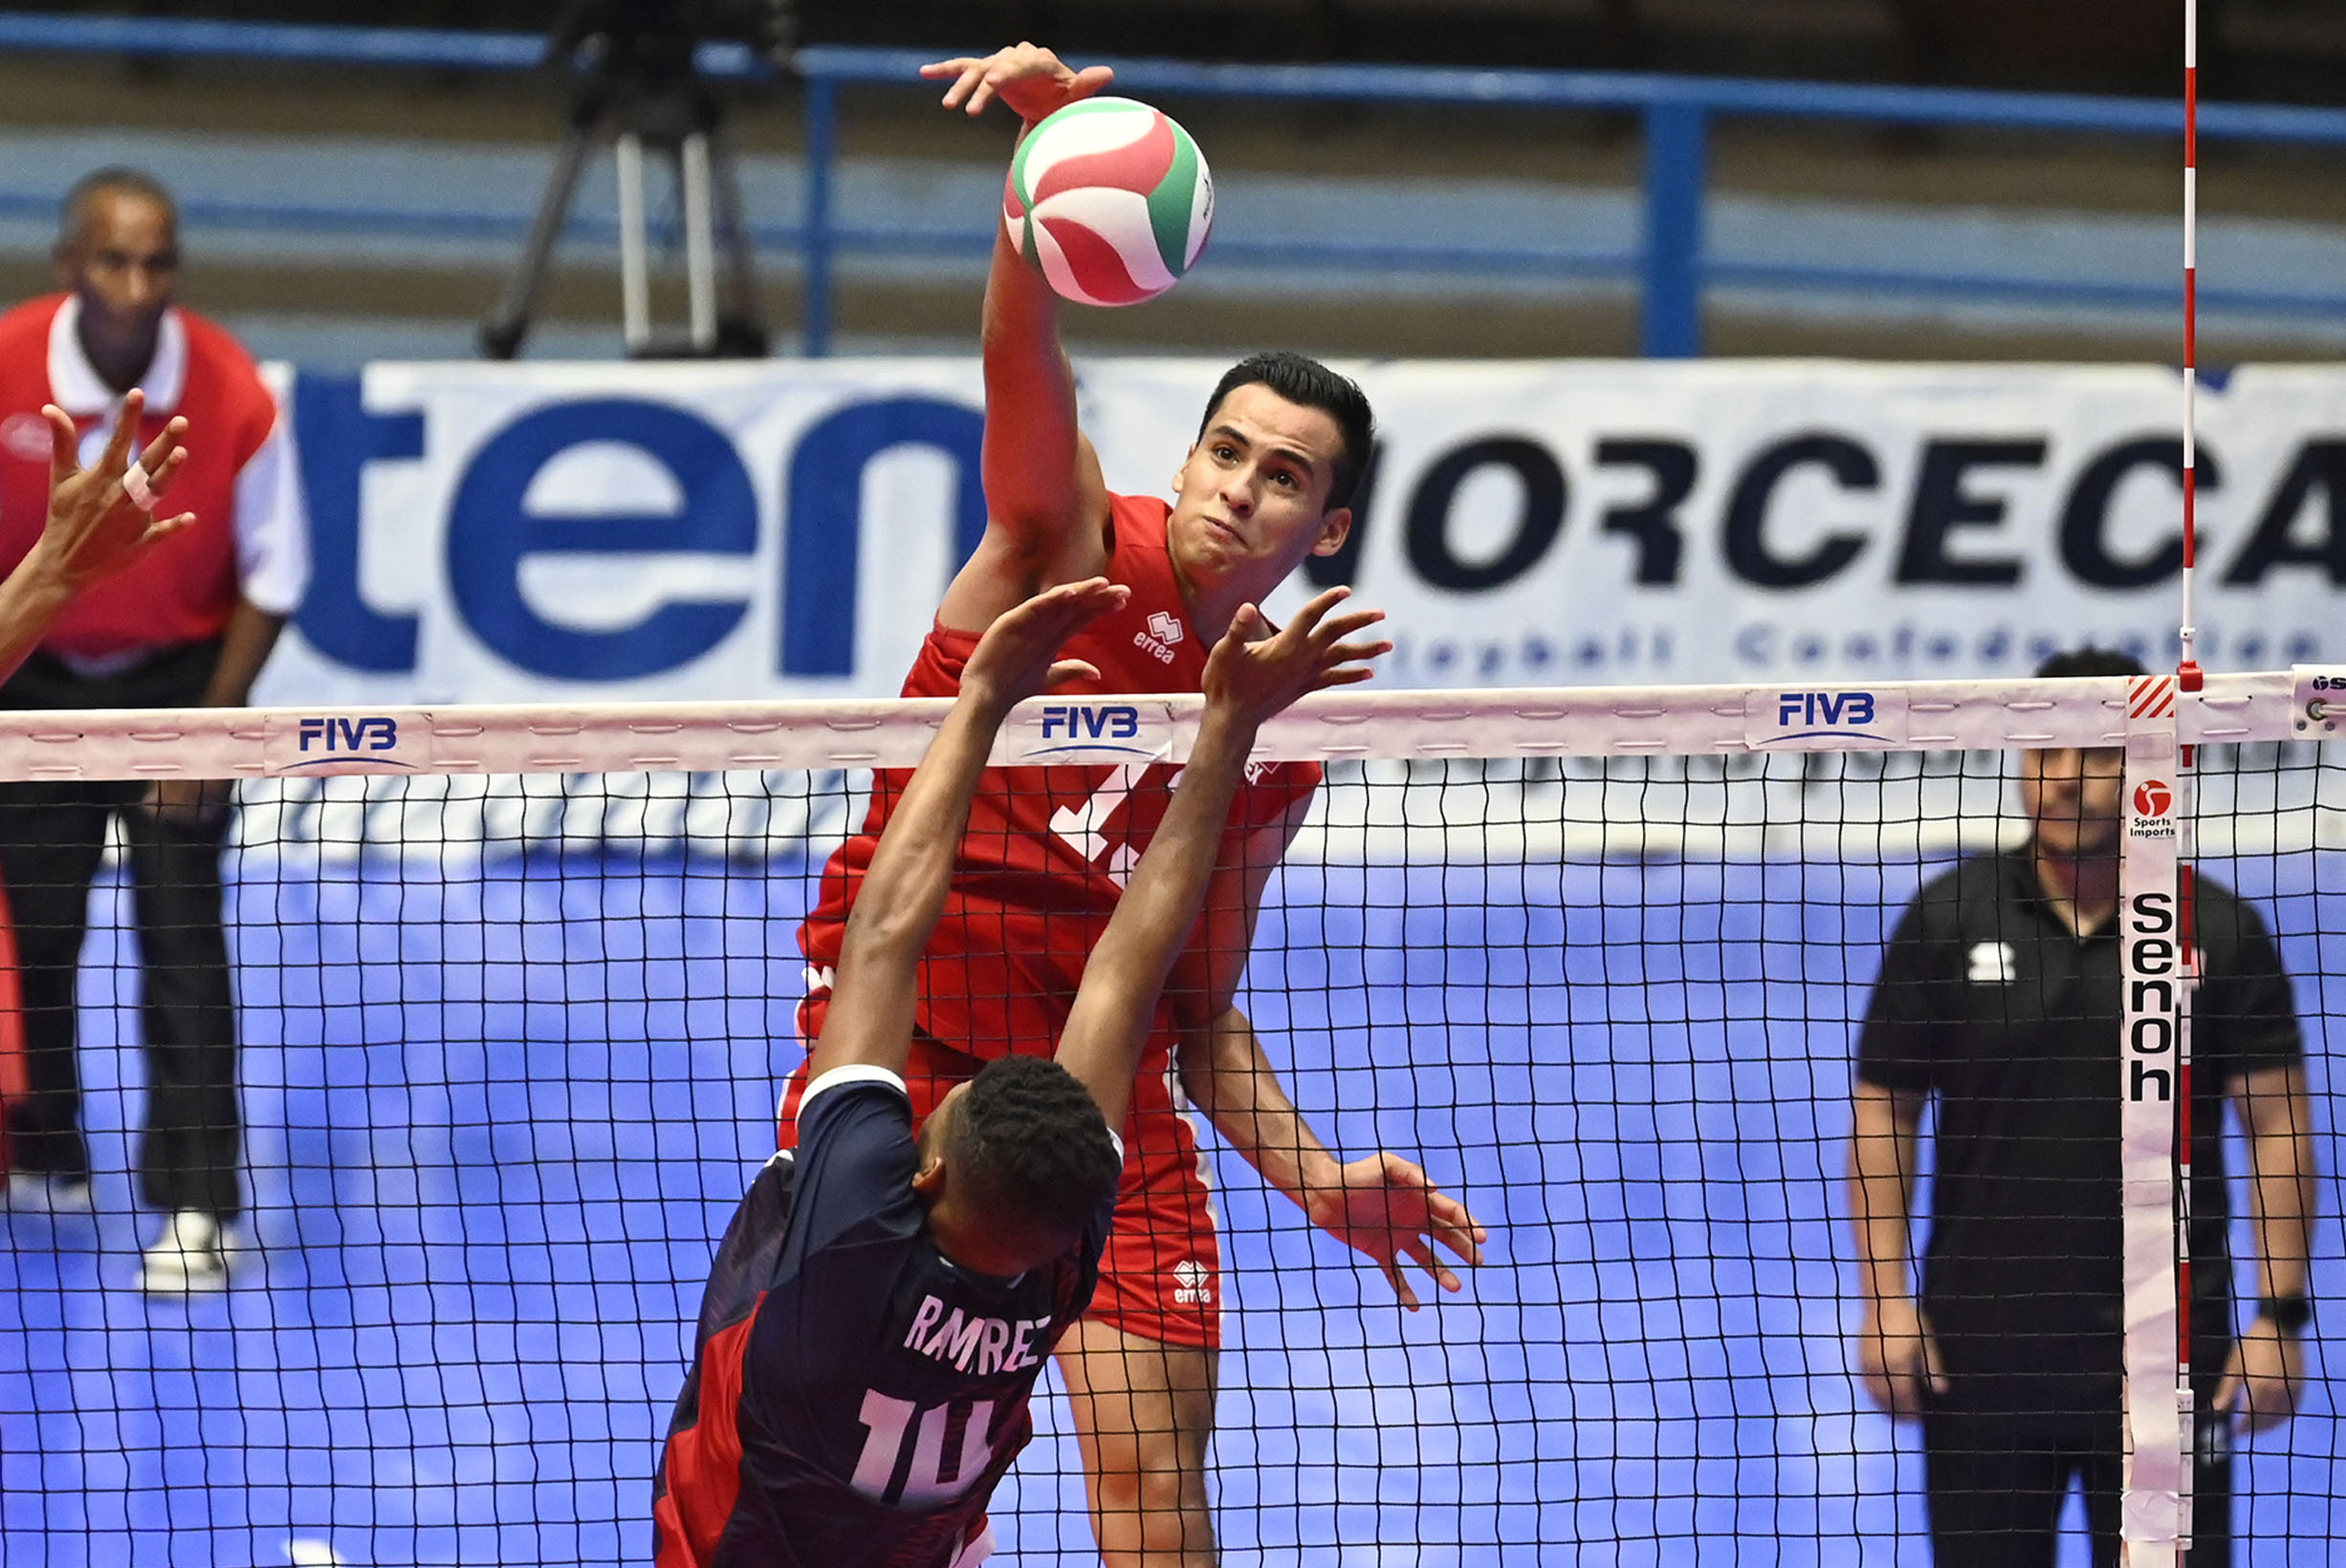 Mexico beat Dominican Republic in opening of U21 Pan American Cup